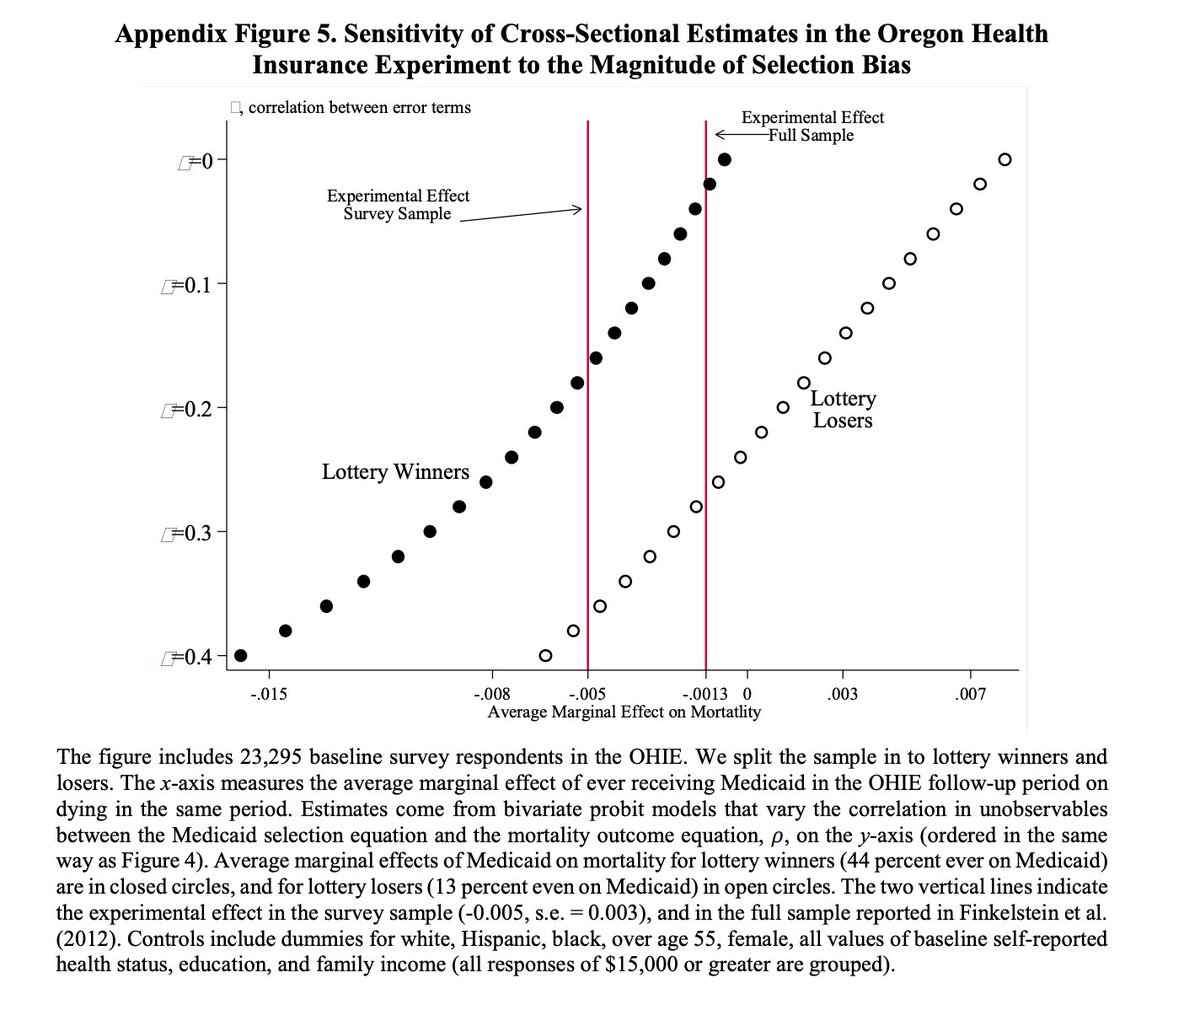 A really cool part is that we can estimate the degree of selection in the Oregon Health Insurance Experiment.Knowing the experimental effect we can see how much selection it takes to make observational estimates equal the experimental one: